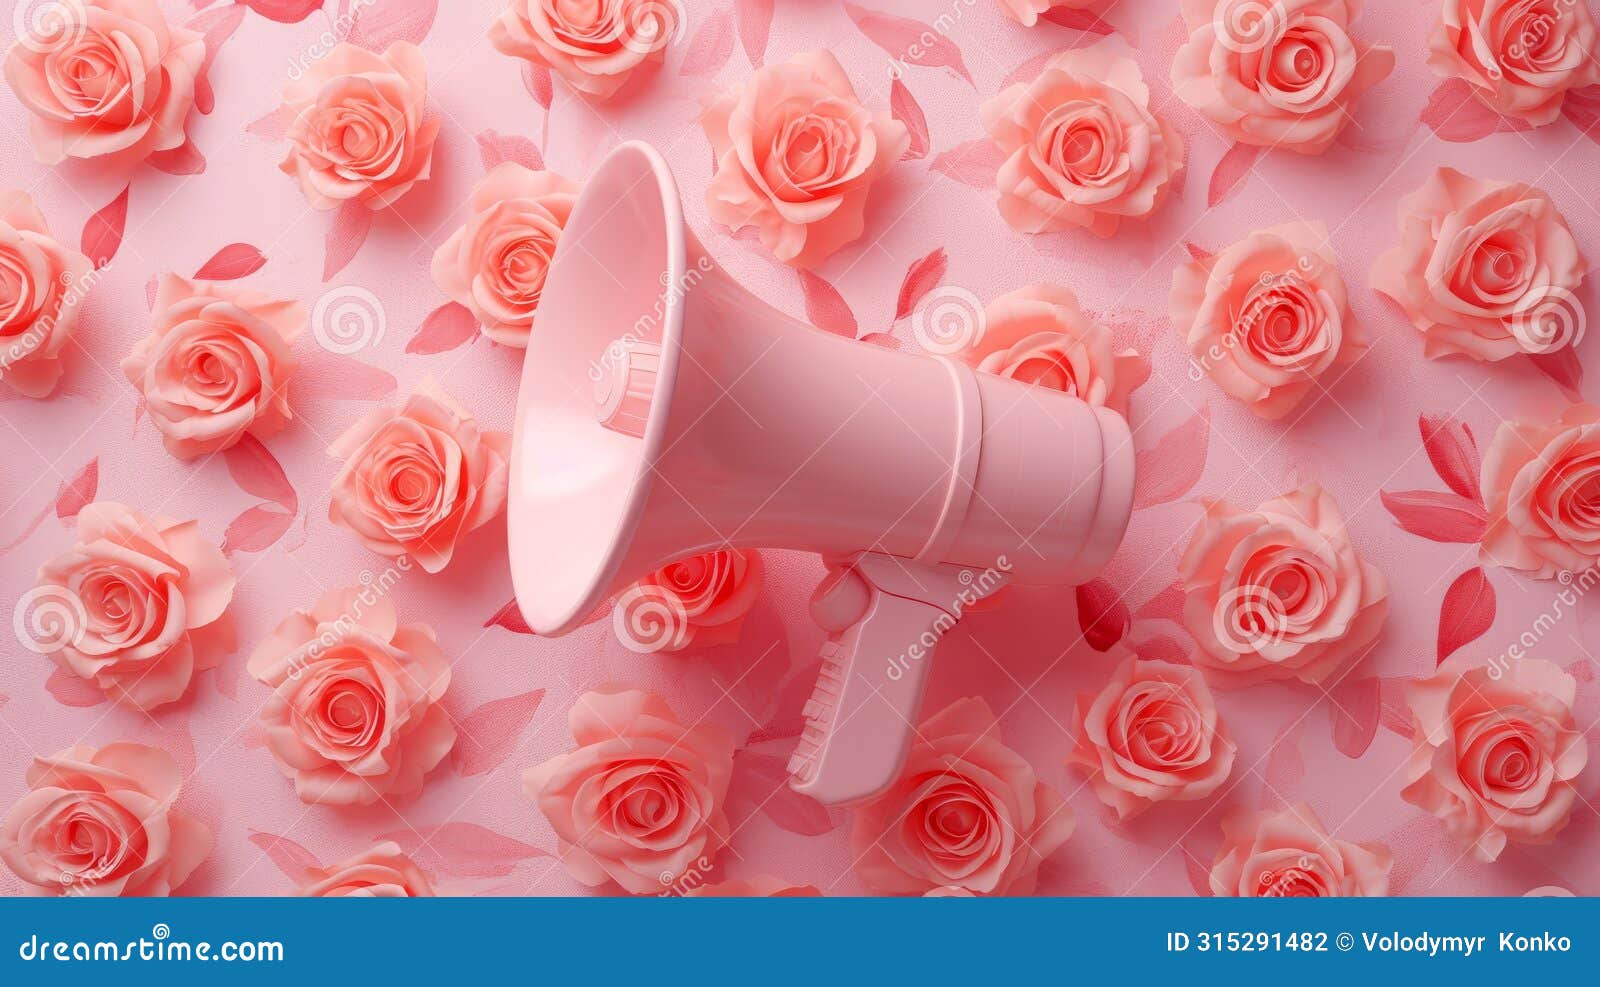 pink megaphone surrounded by roses - amplify your message in a delicate setting